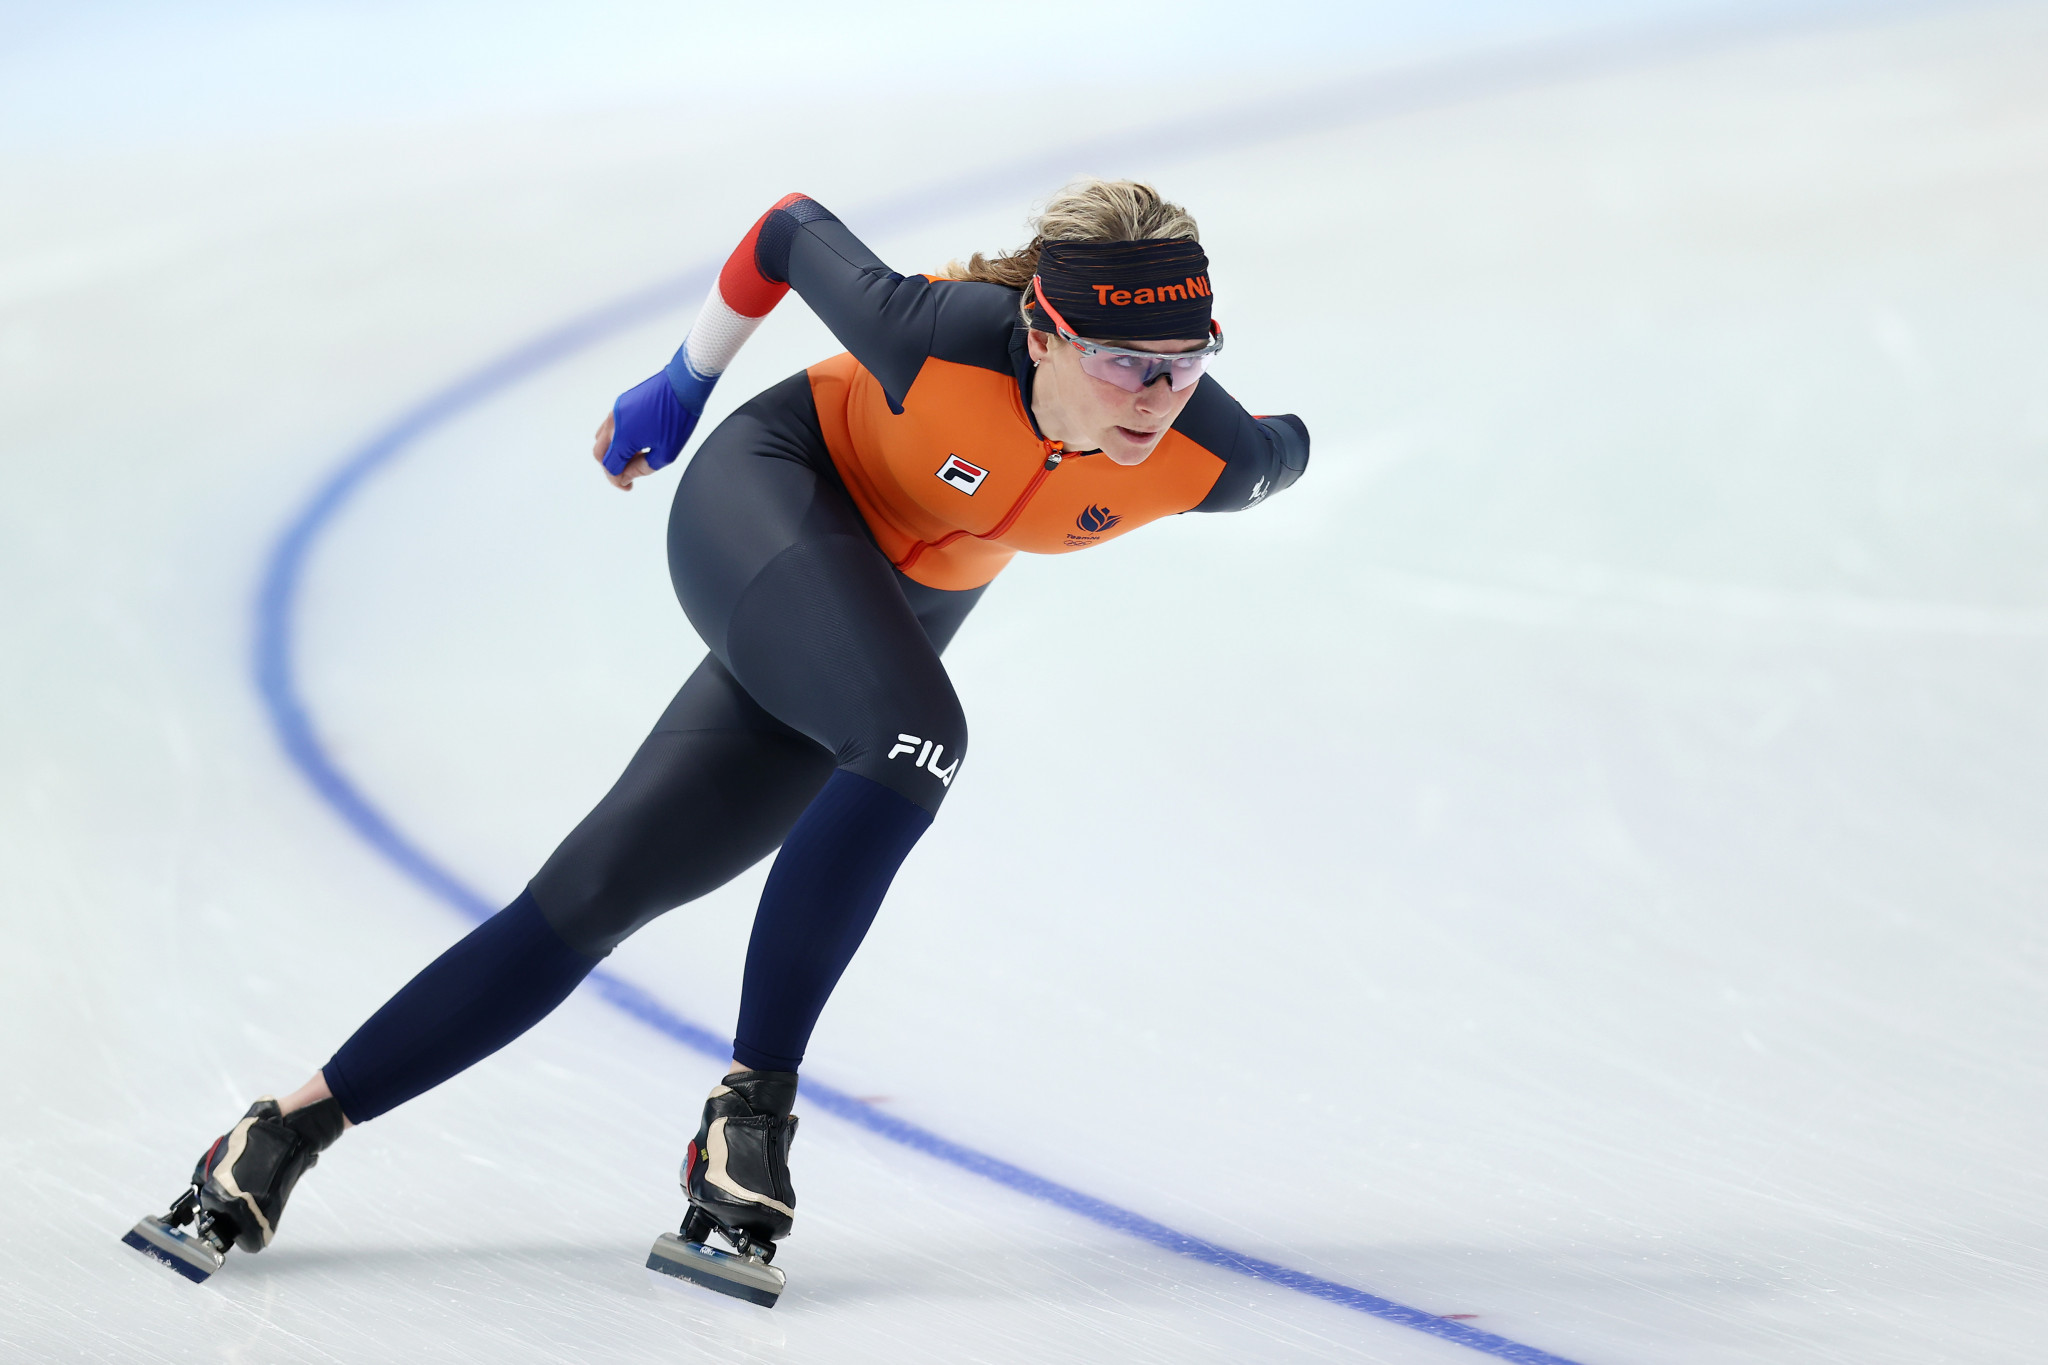 Irene Schouten will compete in the women's 3000m event tomorrow ©Getty Images